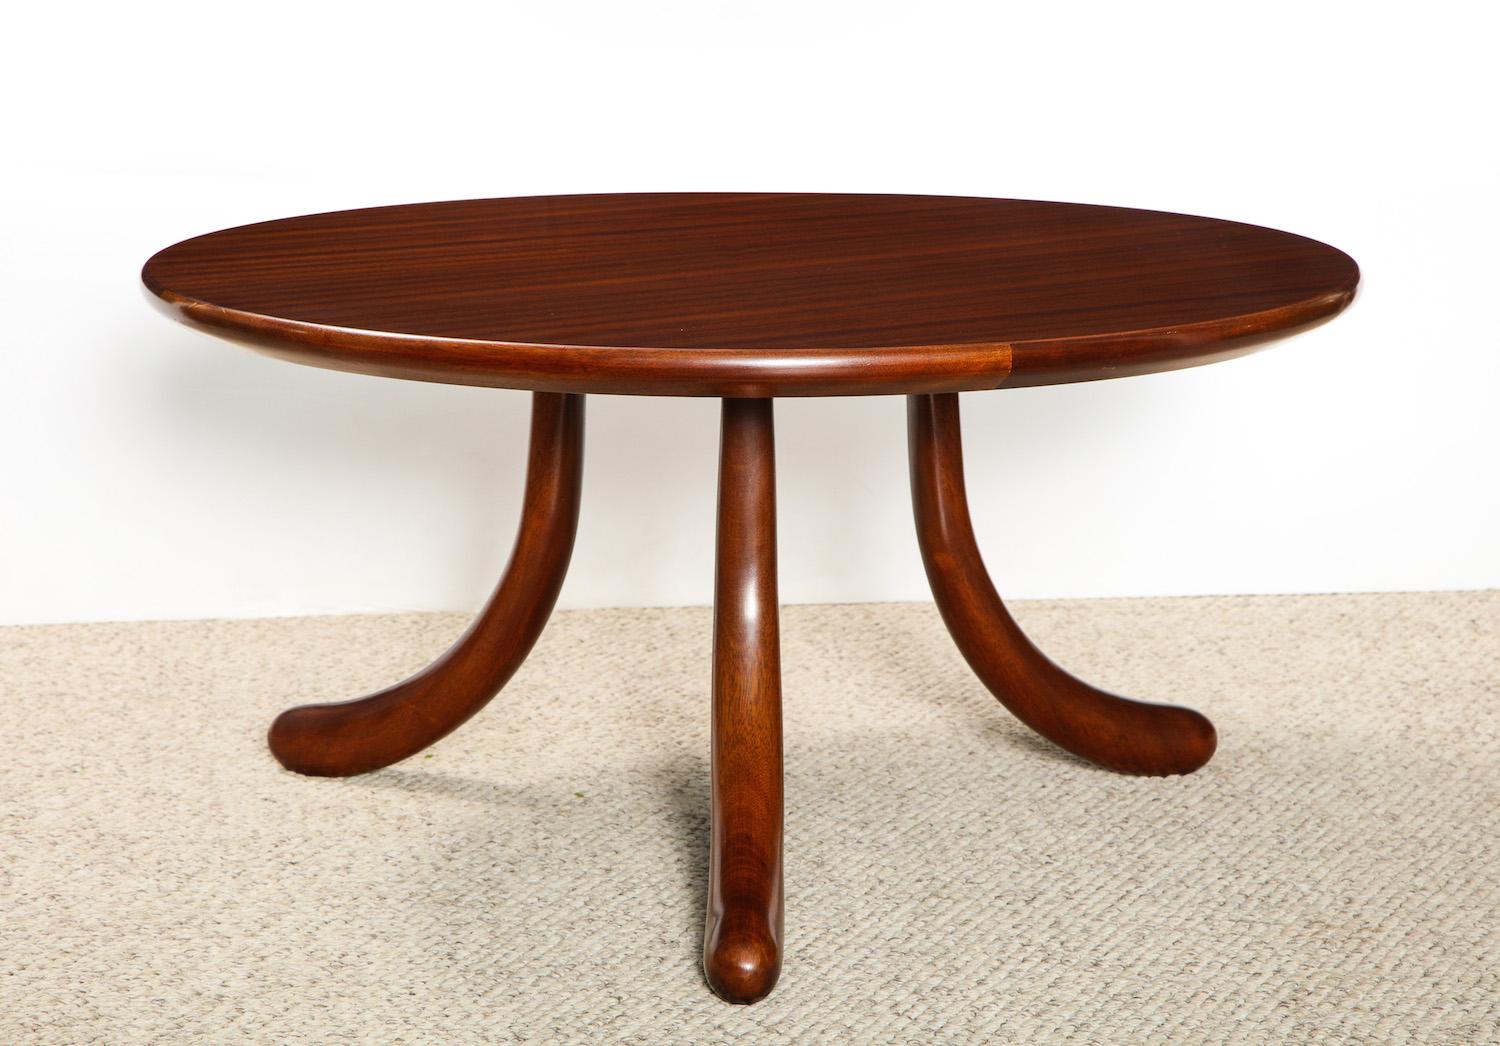 Circular table of solid mahogany. Unusual 3-legged design with rounded details and reverse tapering to each leg.